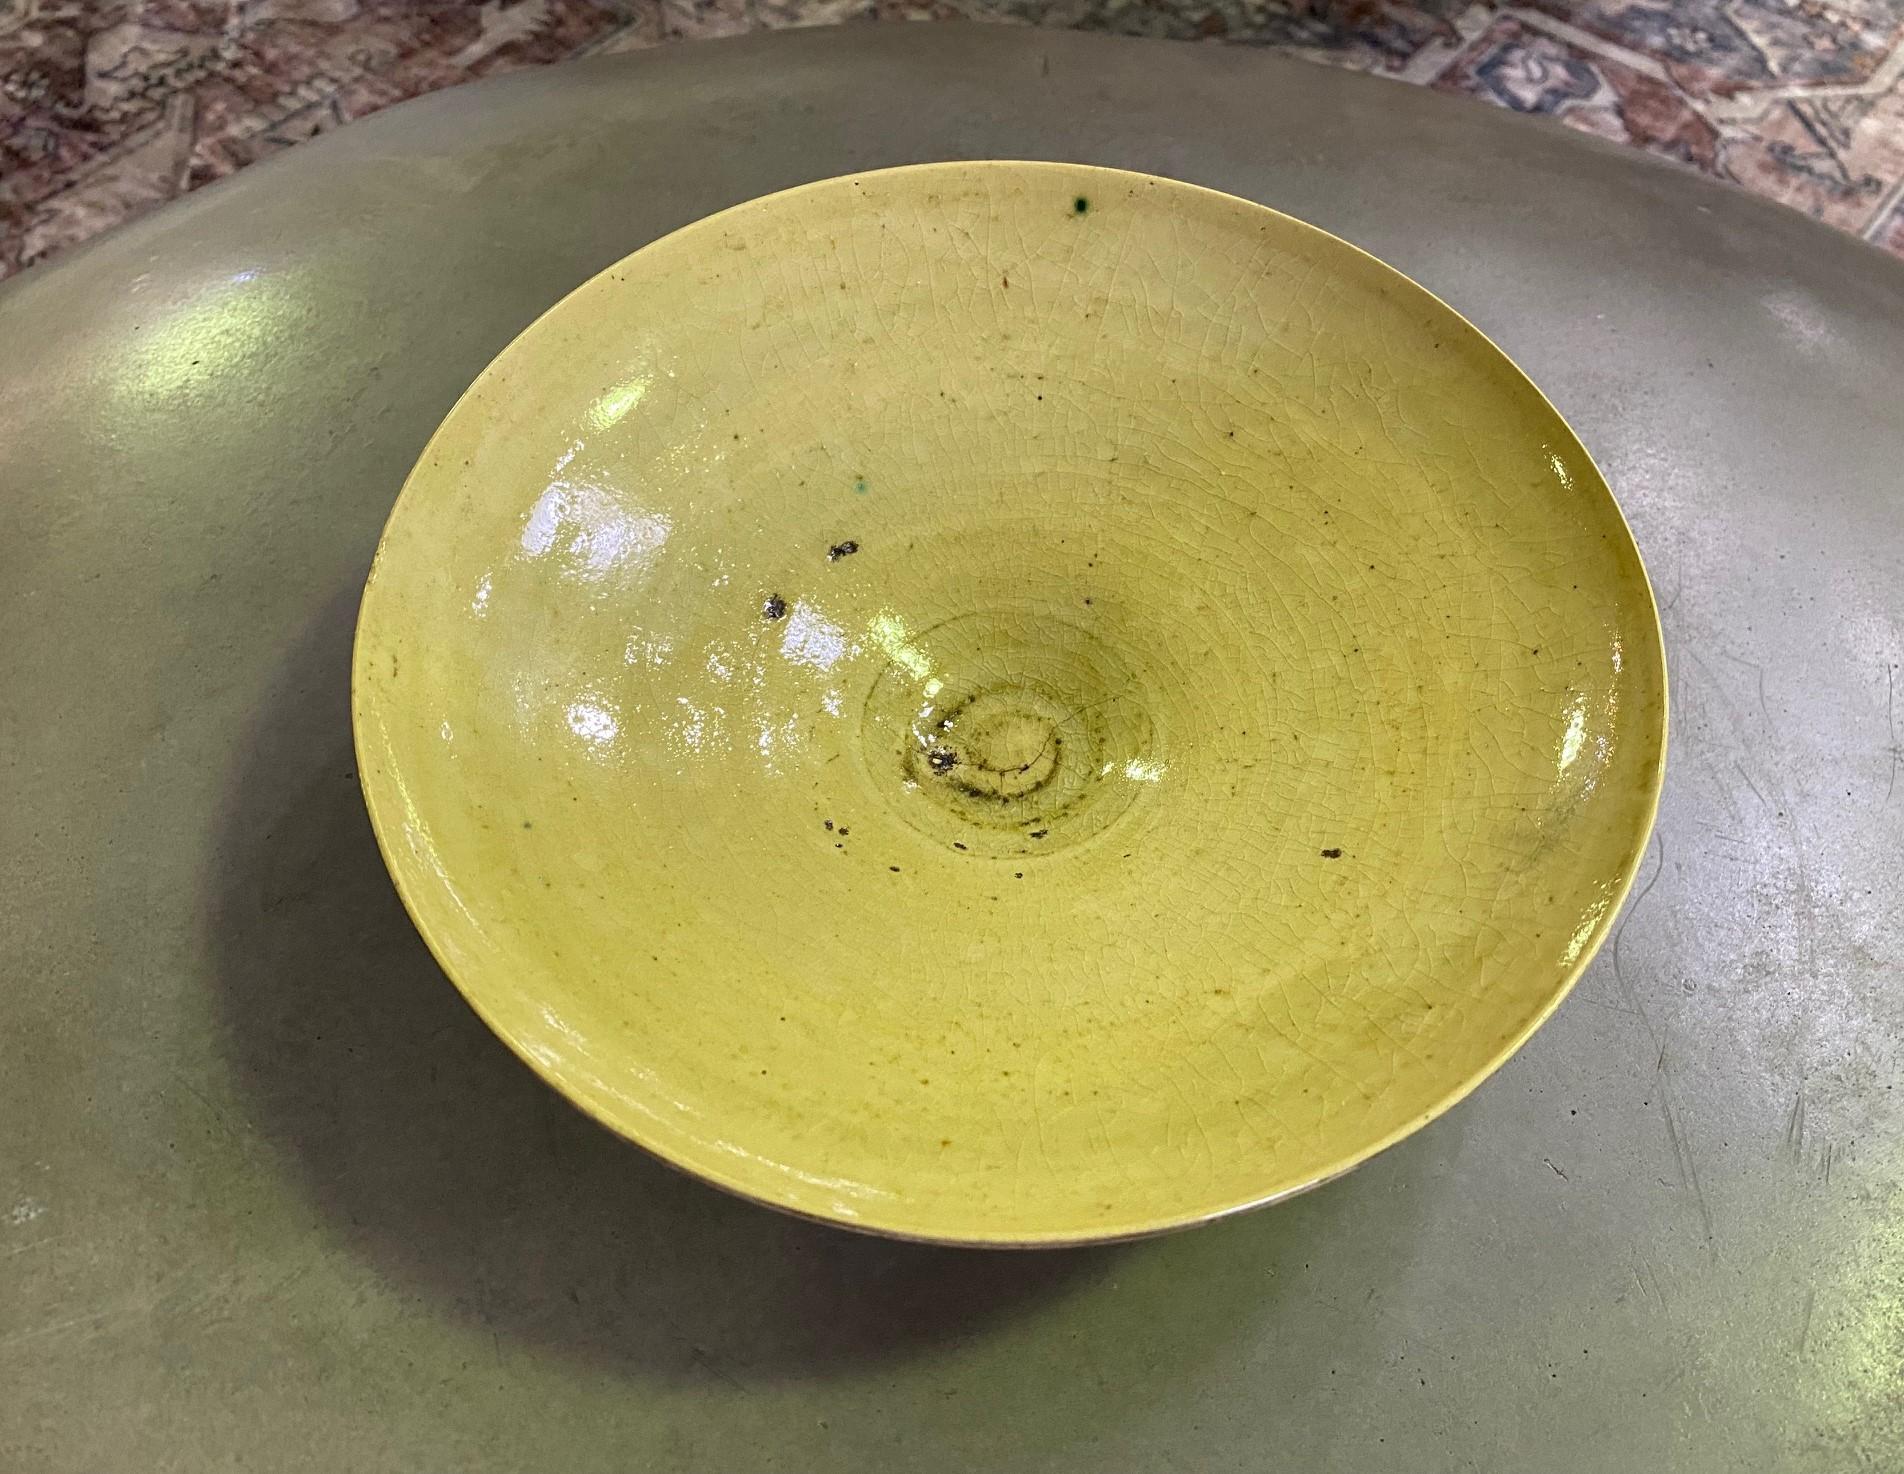 English Lucie Rie Signed Stamped Yellow Speckle Glazed British Pottery Bowl, circa 1950s For Sale